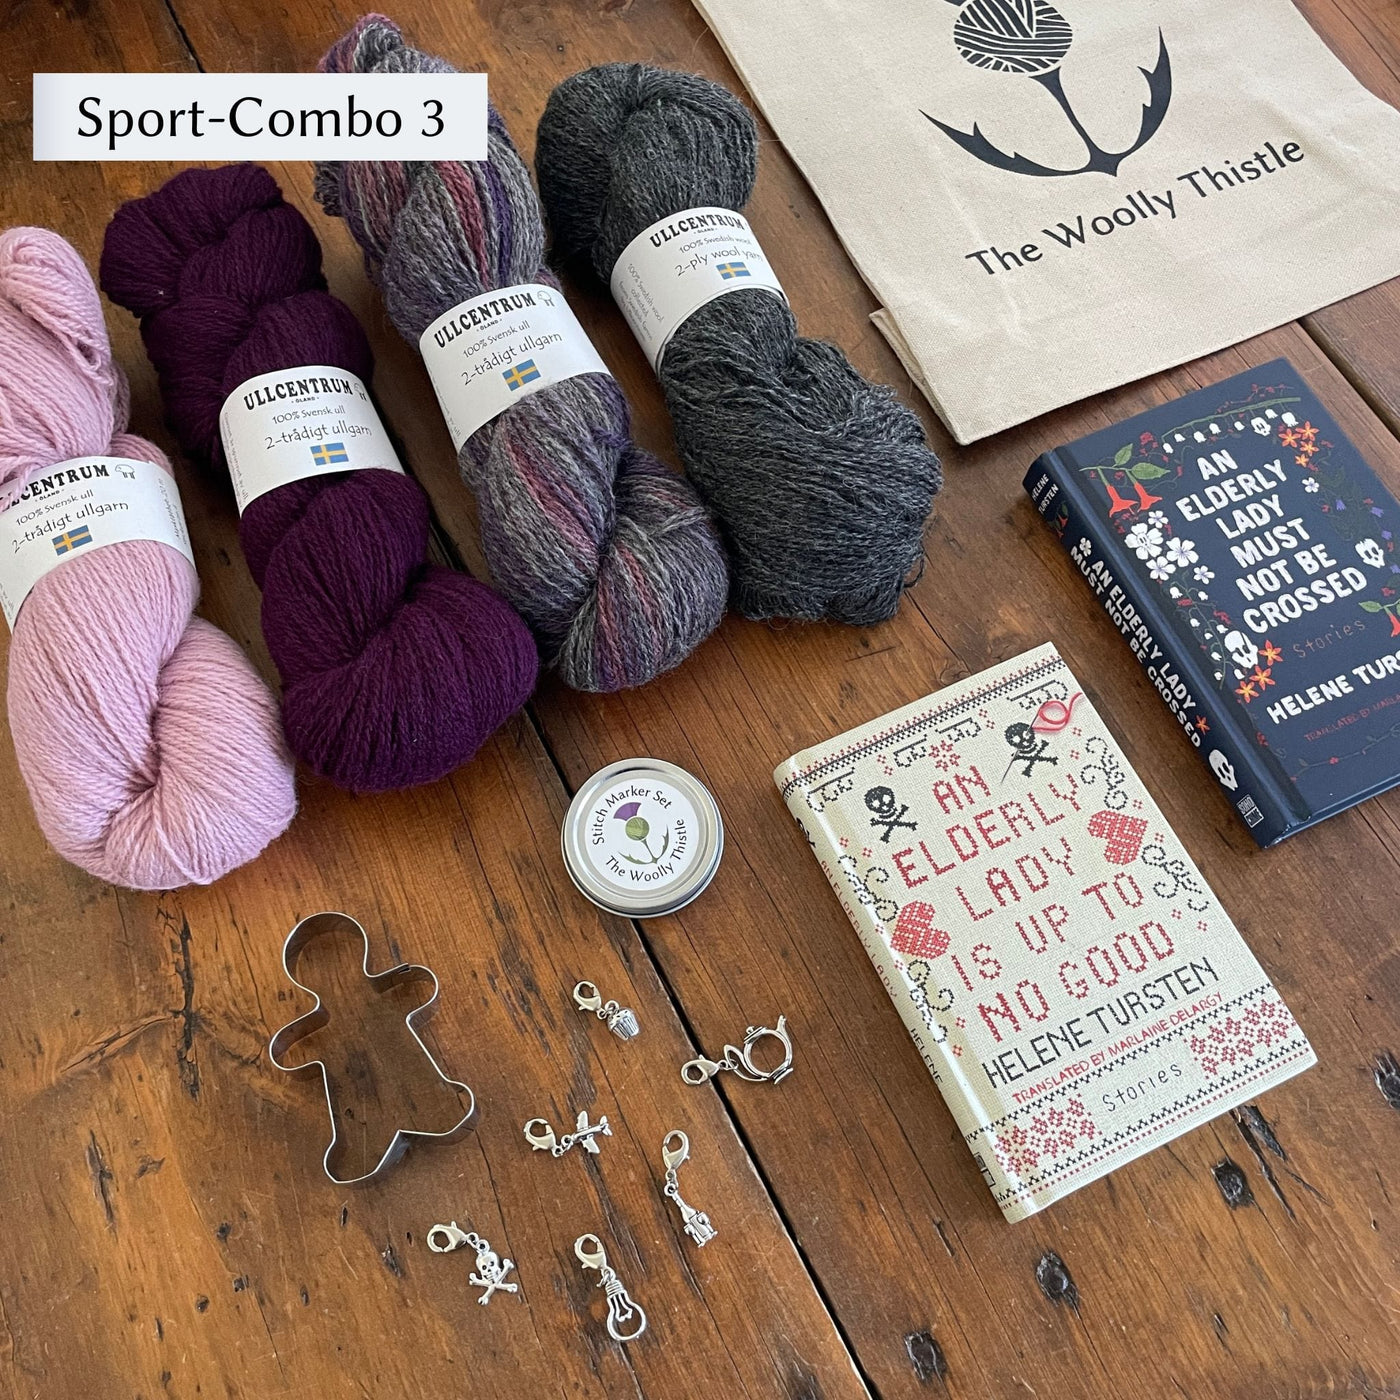 The Swedish Book Bundle components which include two books by Helene Tursten, TWT Tote bag, Stitch marker set, gingerbread cookie cutter, and Ullcentrum Sport Weight yarn. Components are shown and laid out on table. Yarn colors in Sport Combo 3 include pink, deep purple, variegated grey, and dark grey.